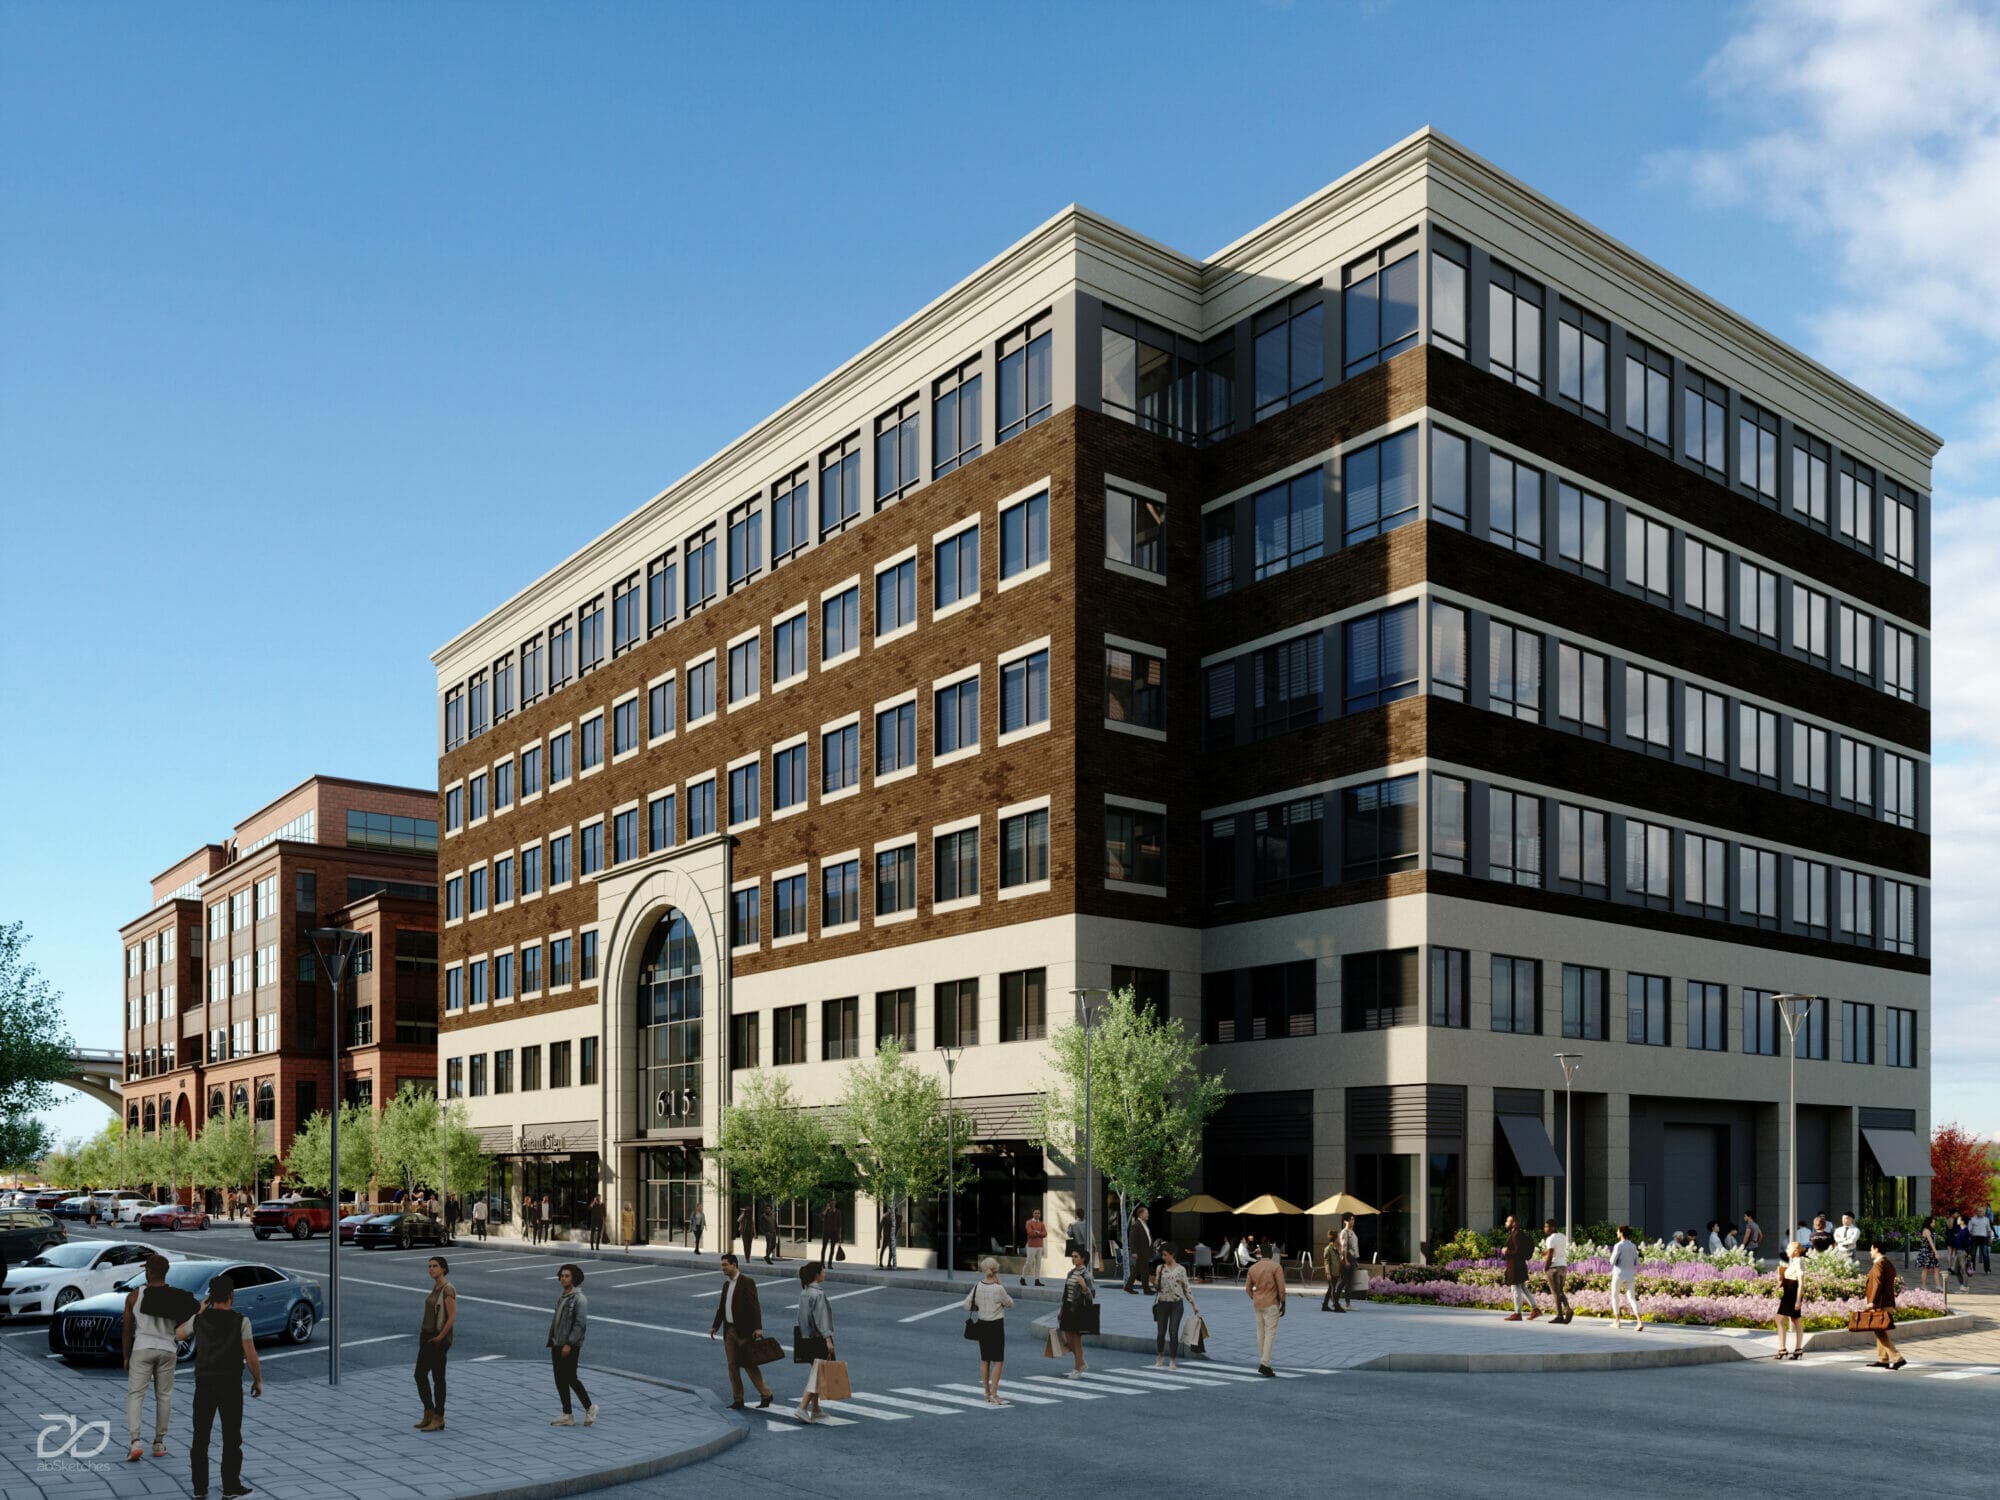 A virtual look at The Mohrbanc, the Allentown Waterfront building slated to open this fall